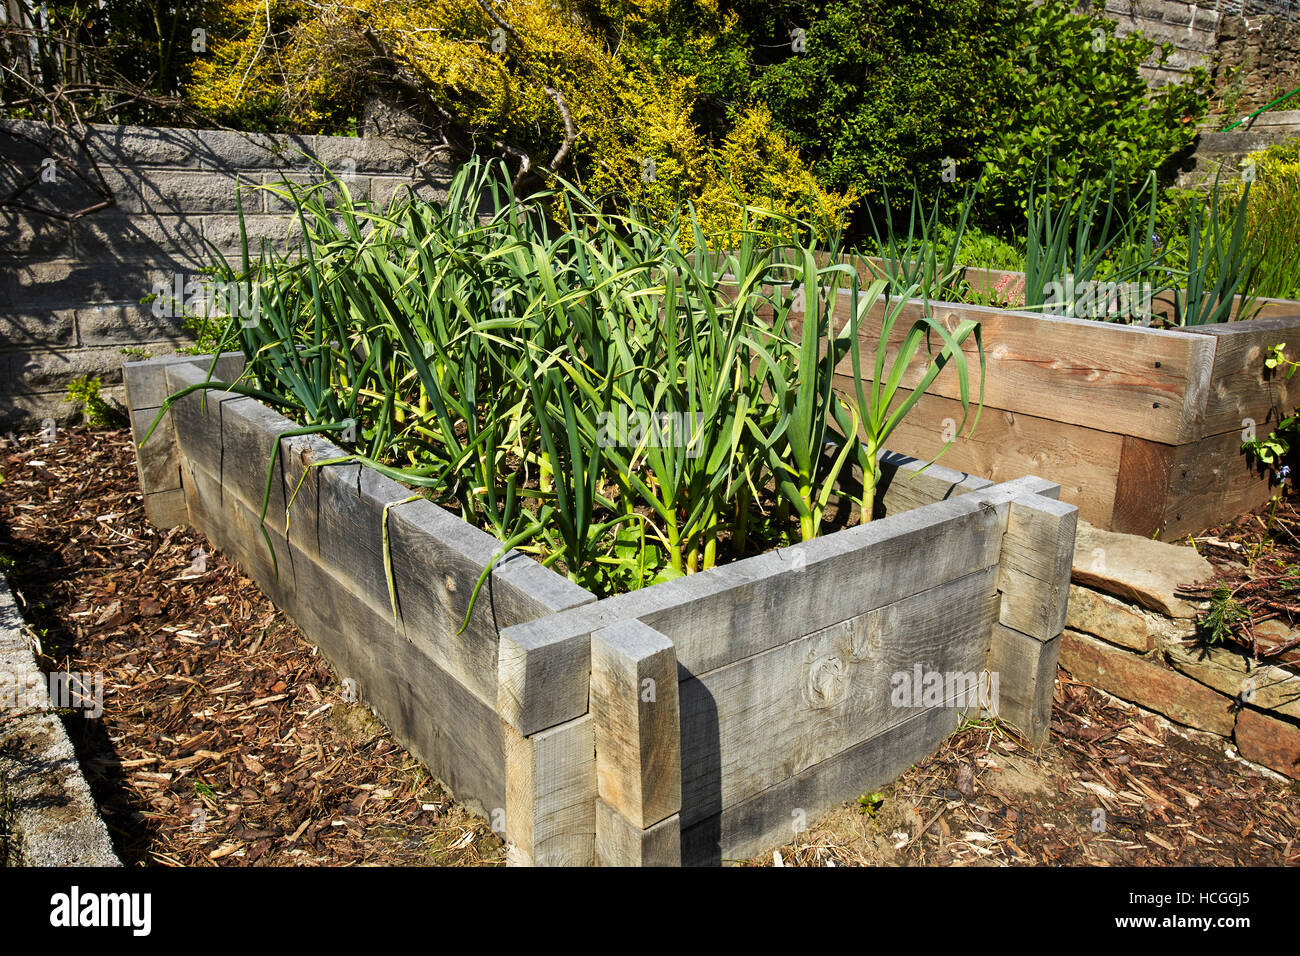 Garlic growing in a raised bed in a garden in Wales, UK Stock Photo